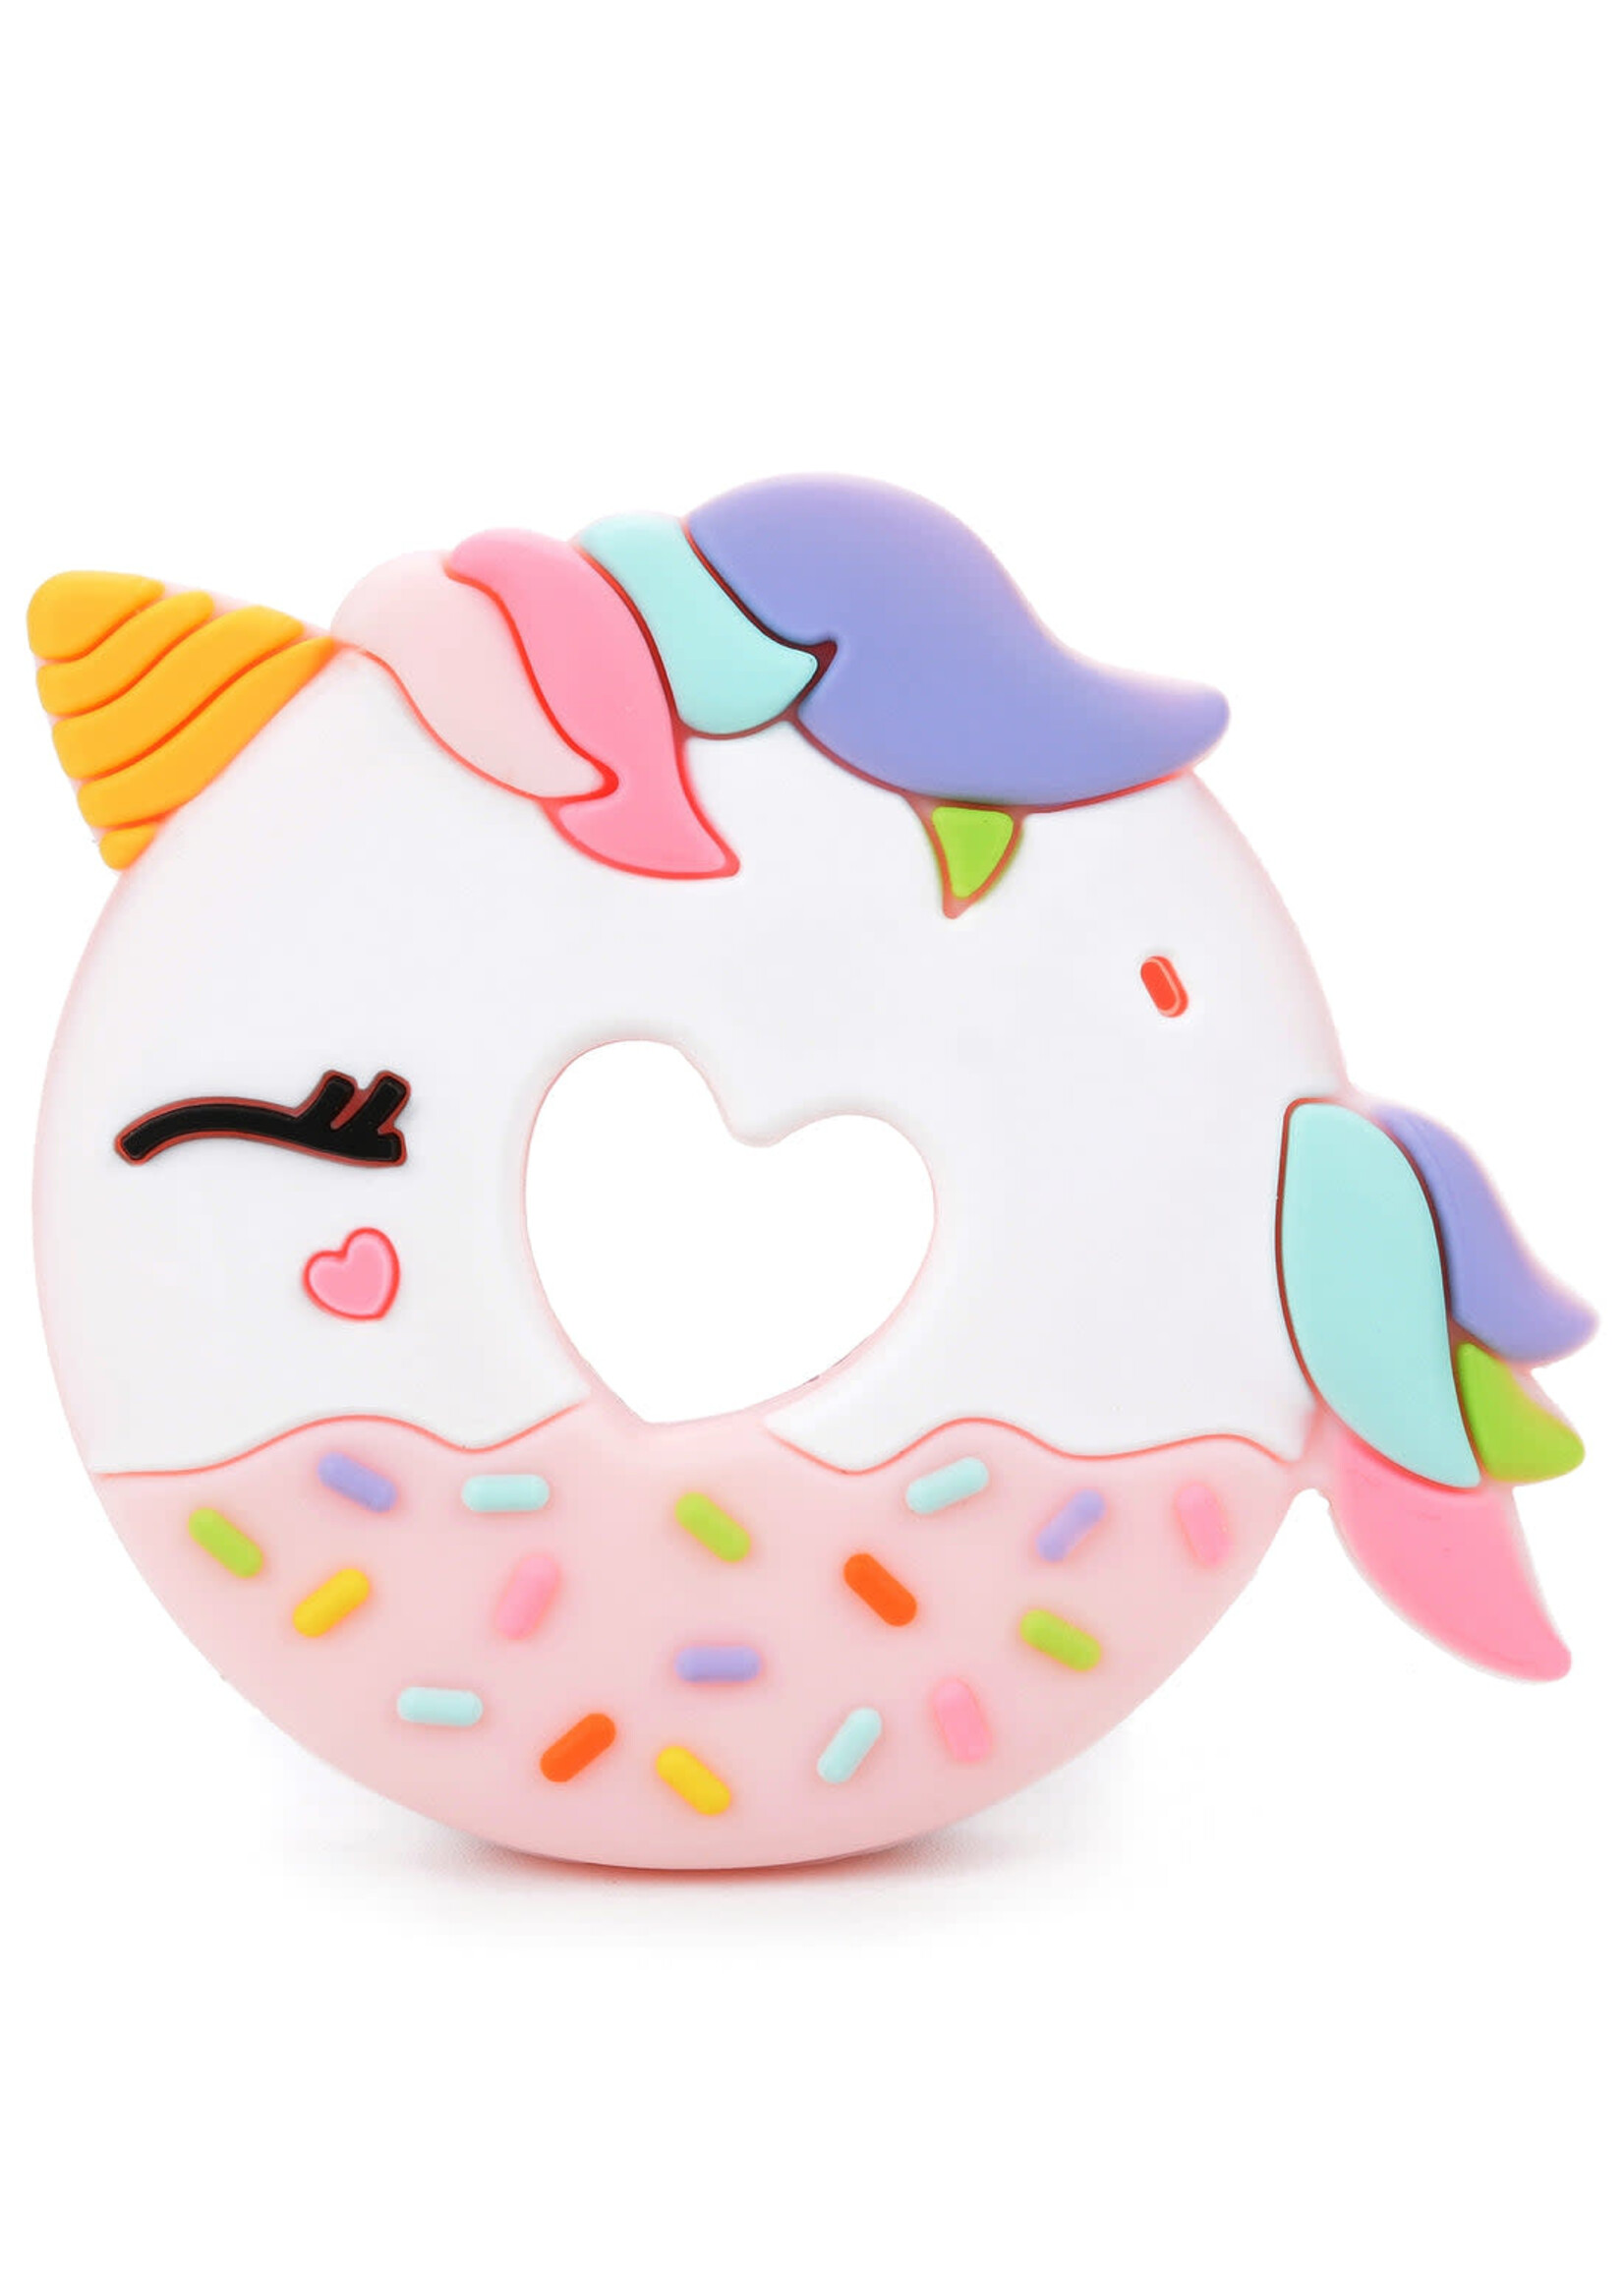 LOULOU LOLLIPOP Silicone teether, PINK UNICORN DONUT